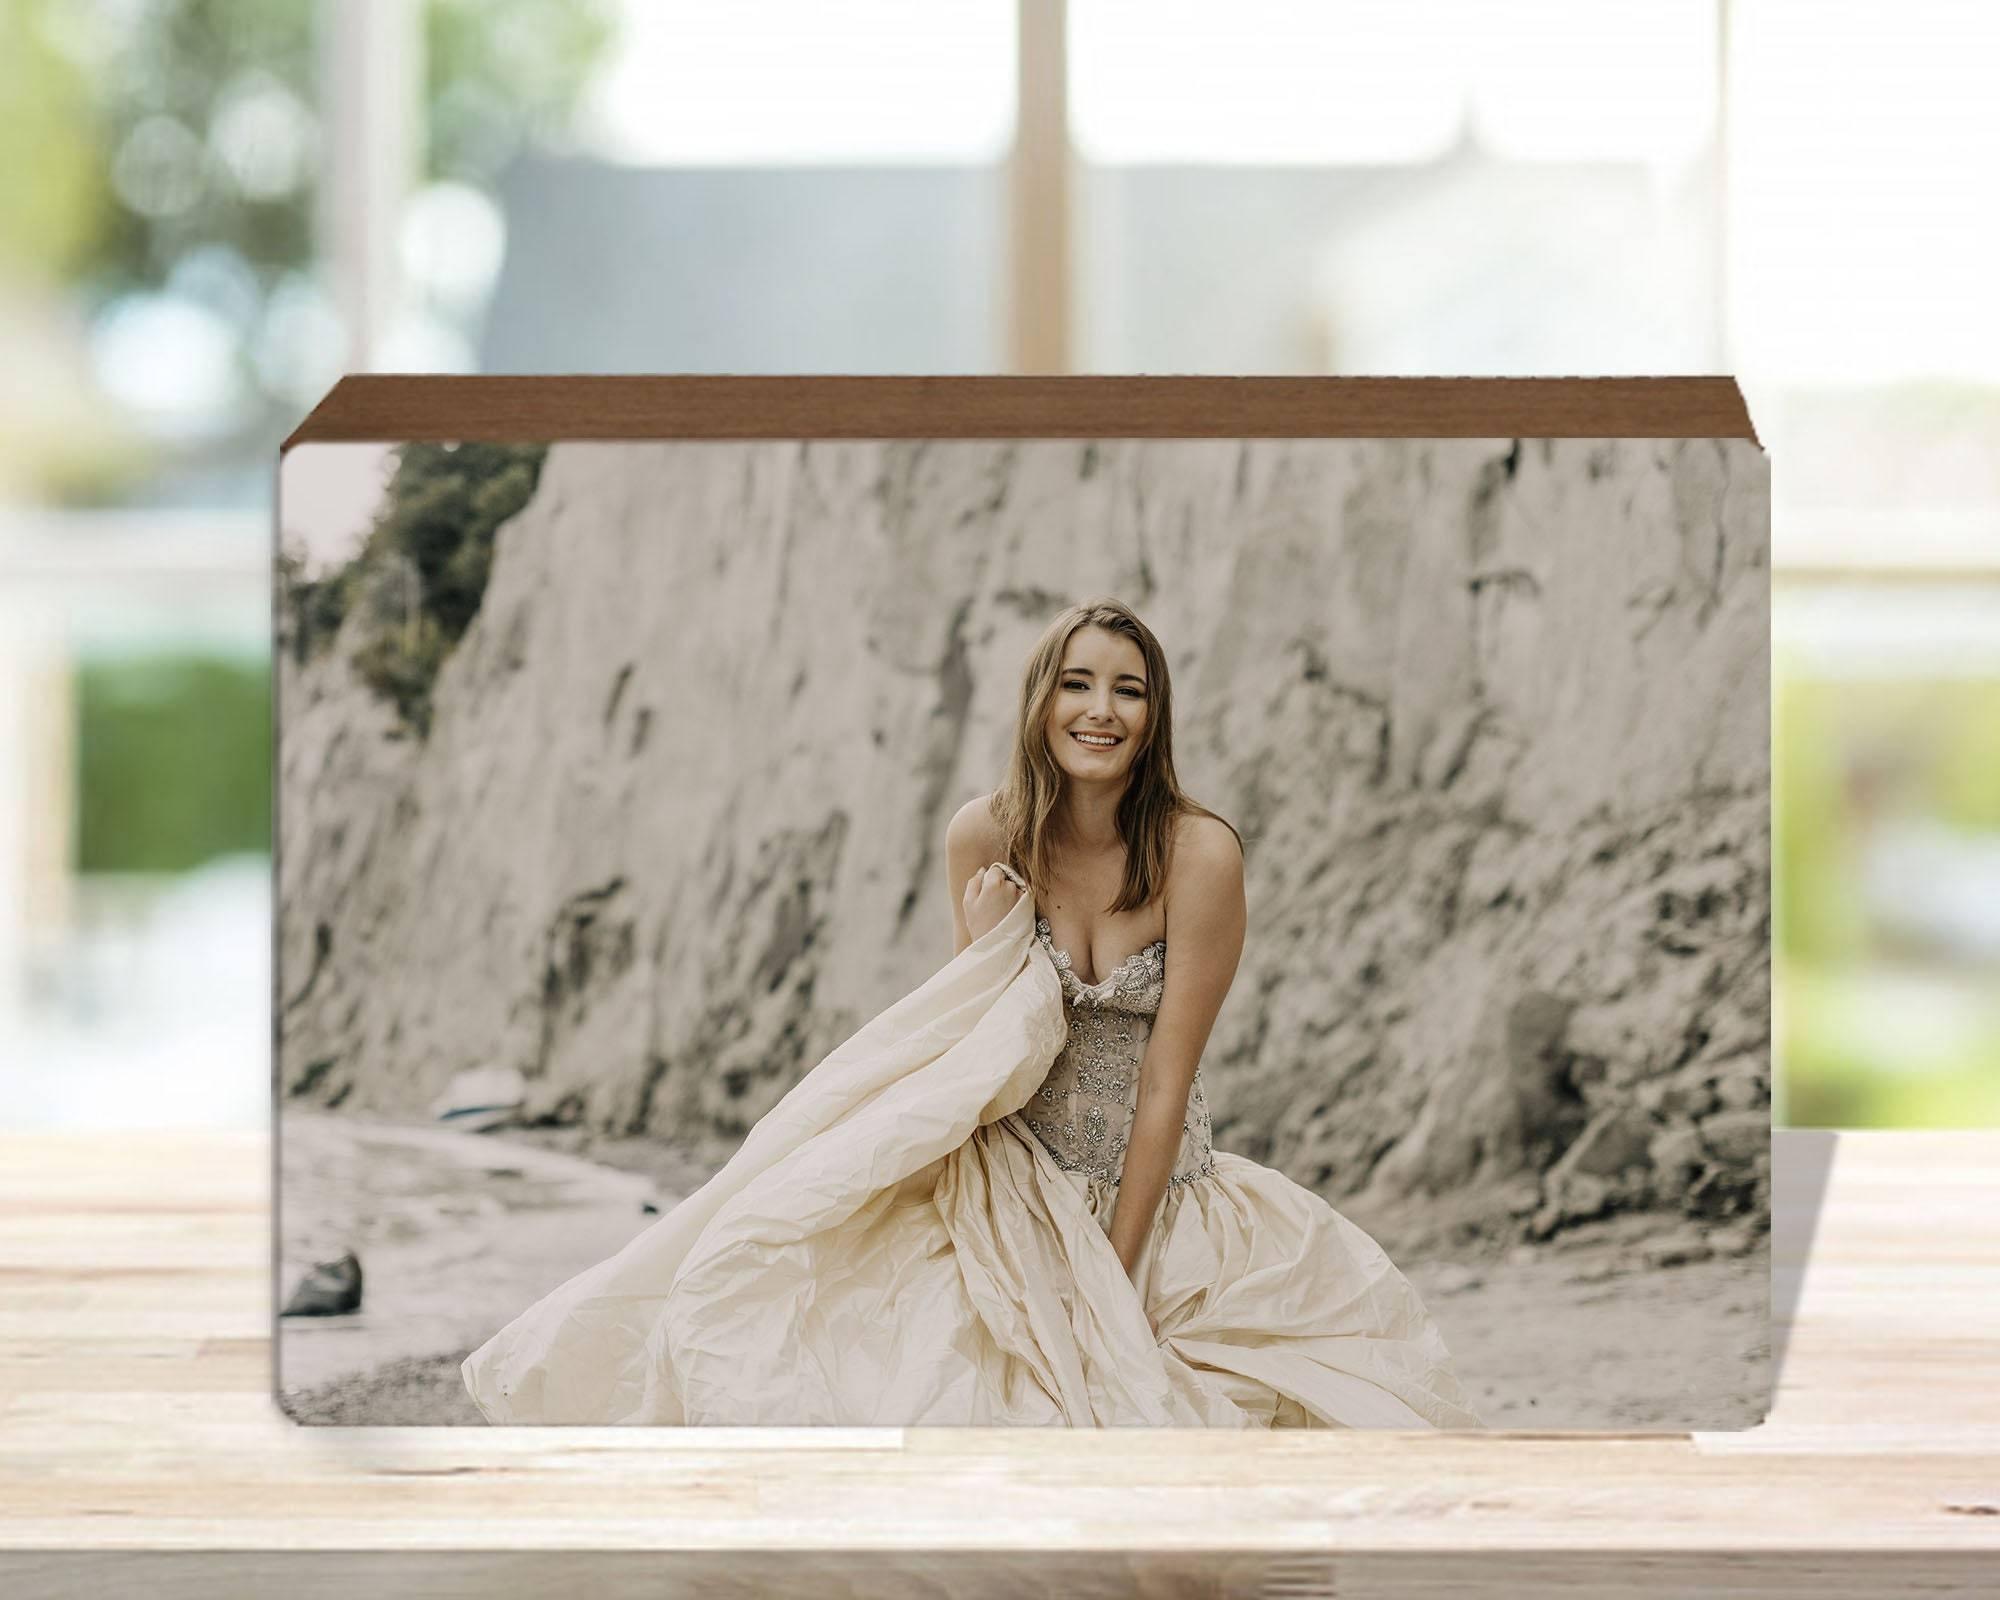 Custom Photo ShoutBox | Personalized Home Décor | Wedding Photo - This & That Solutions - Custom Photo ShoutBox | Personalized Home Décor | Wedding Photo - Personalized Gifts & Custom Home Decor